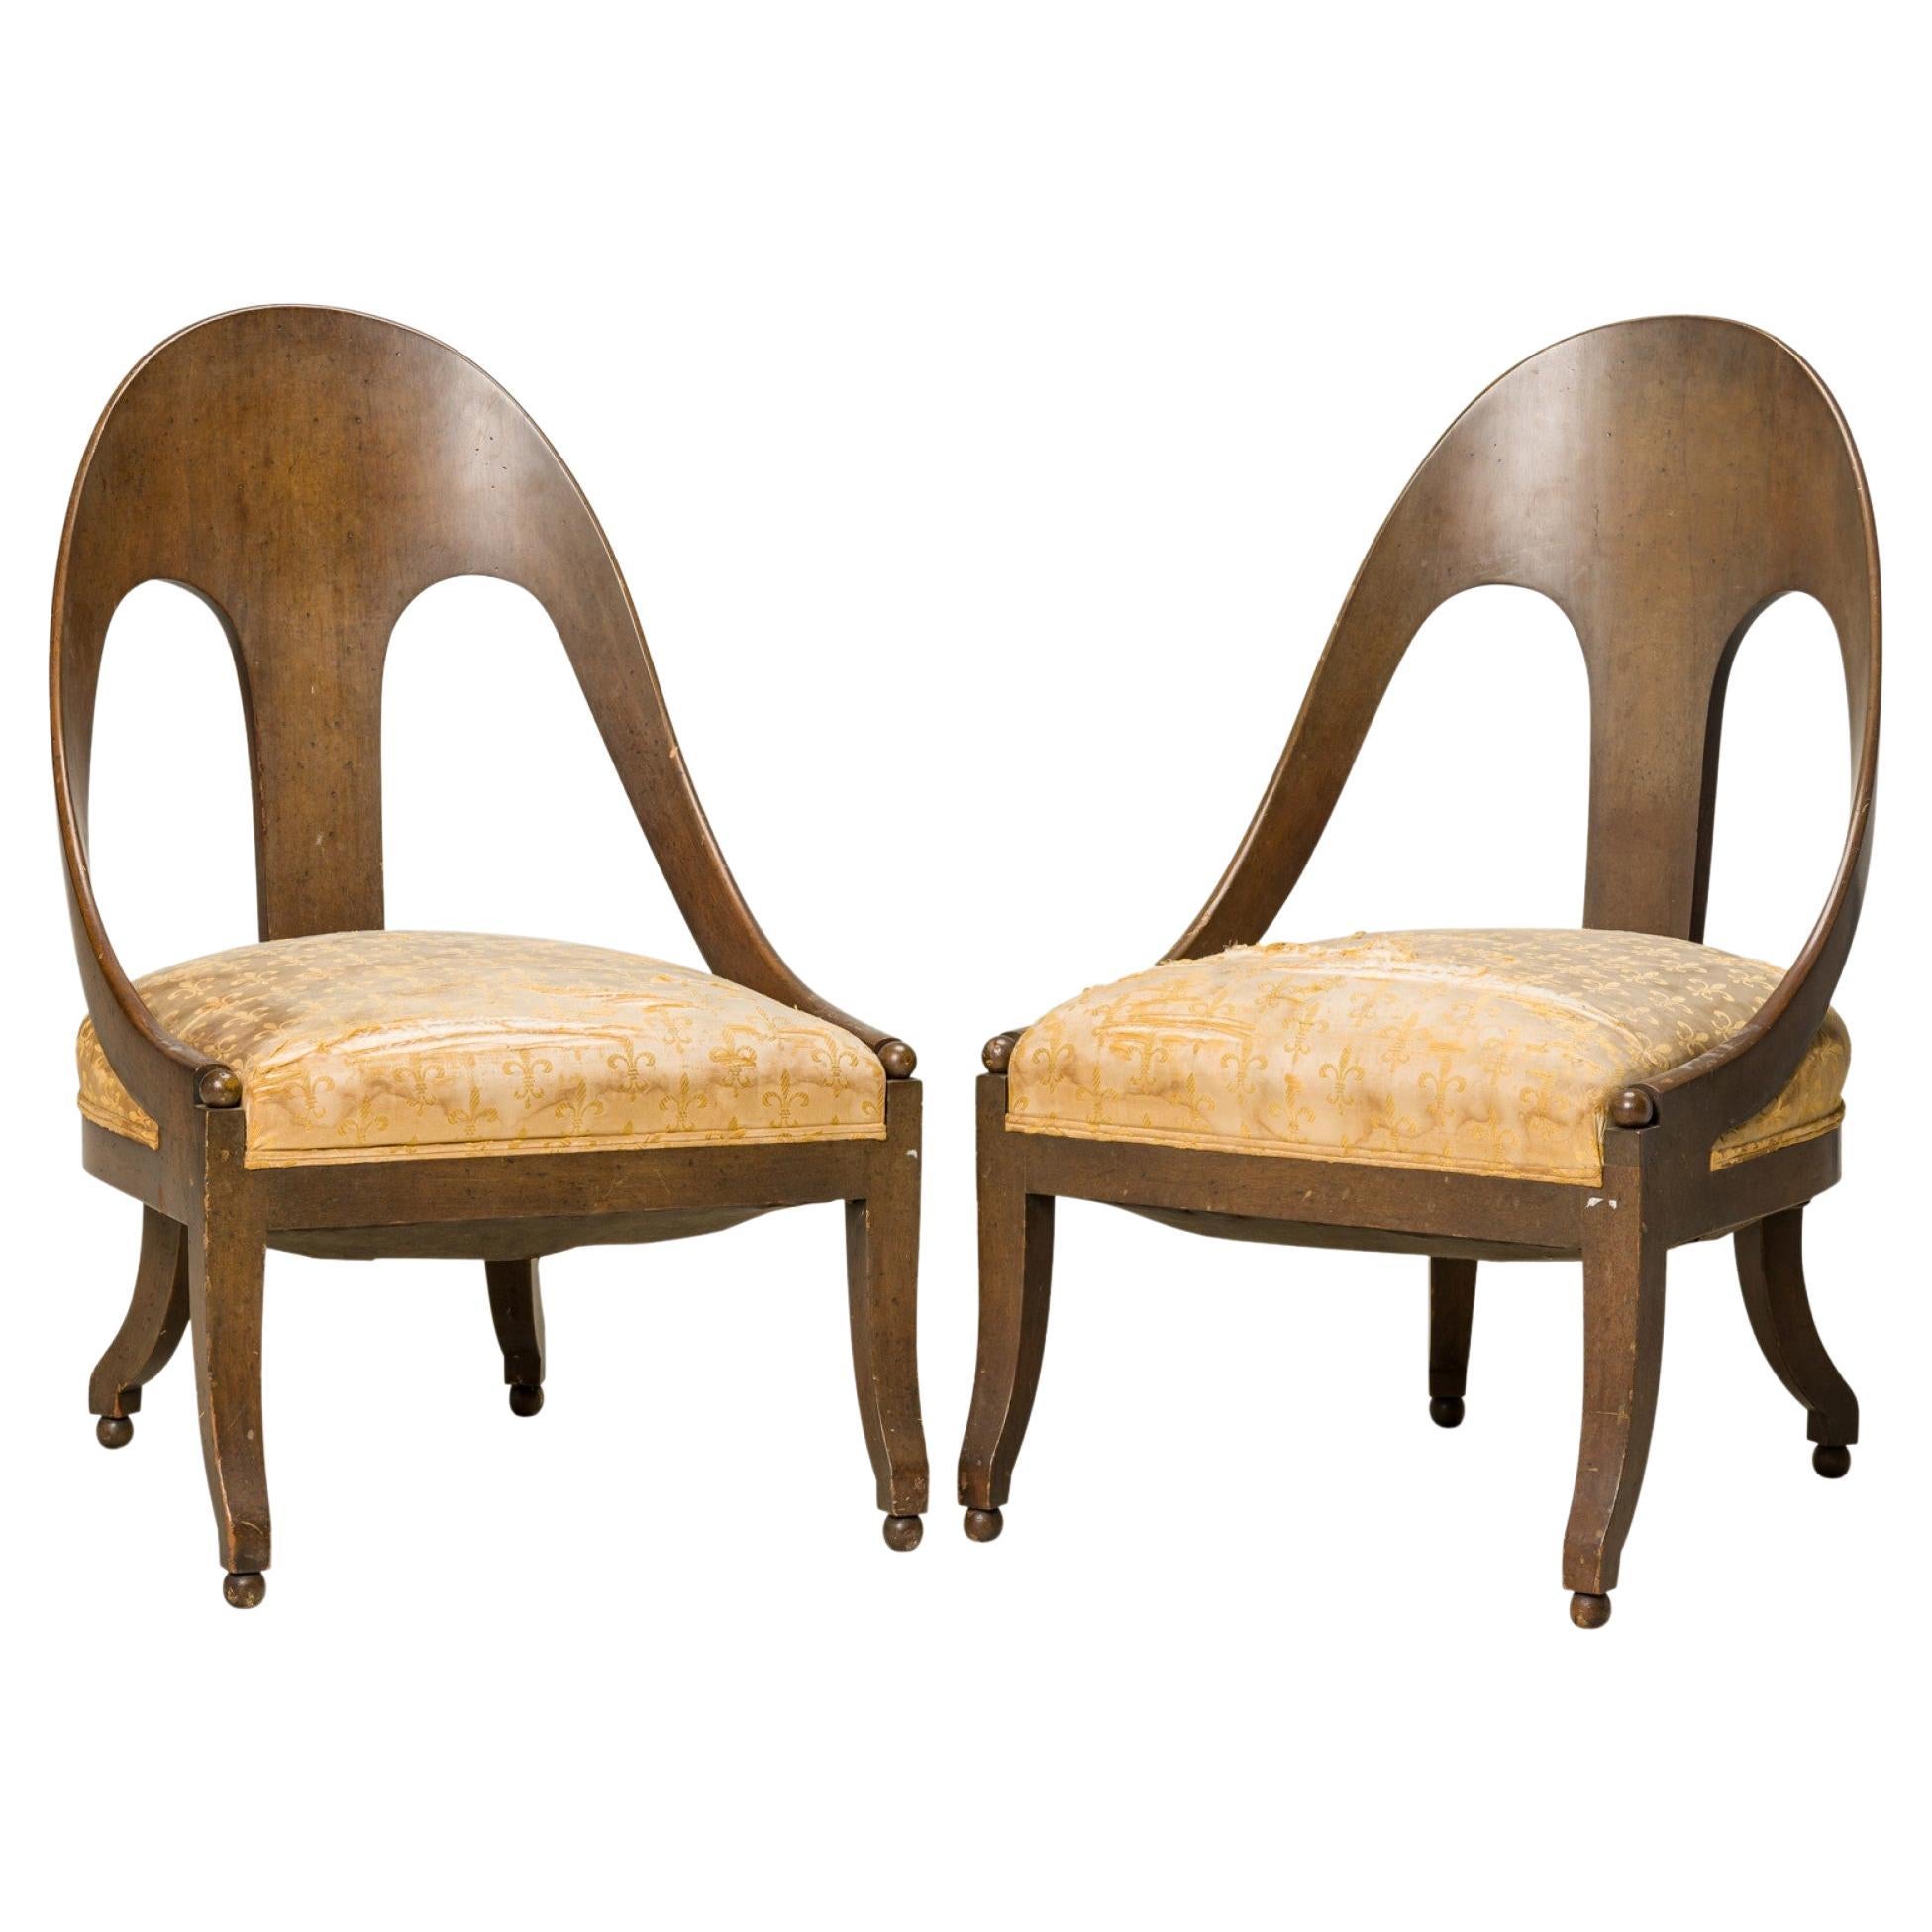 Pair of Walnut and Fleur De Lis Print Beige Upholstery Spoon Back Side Chairs For Sale